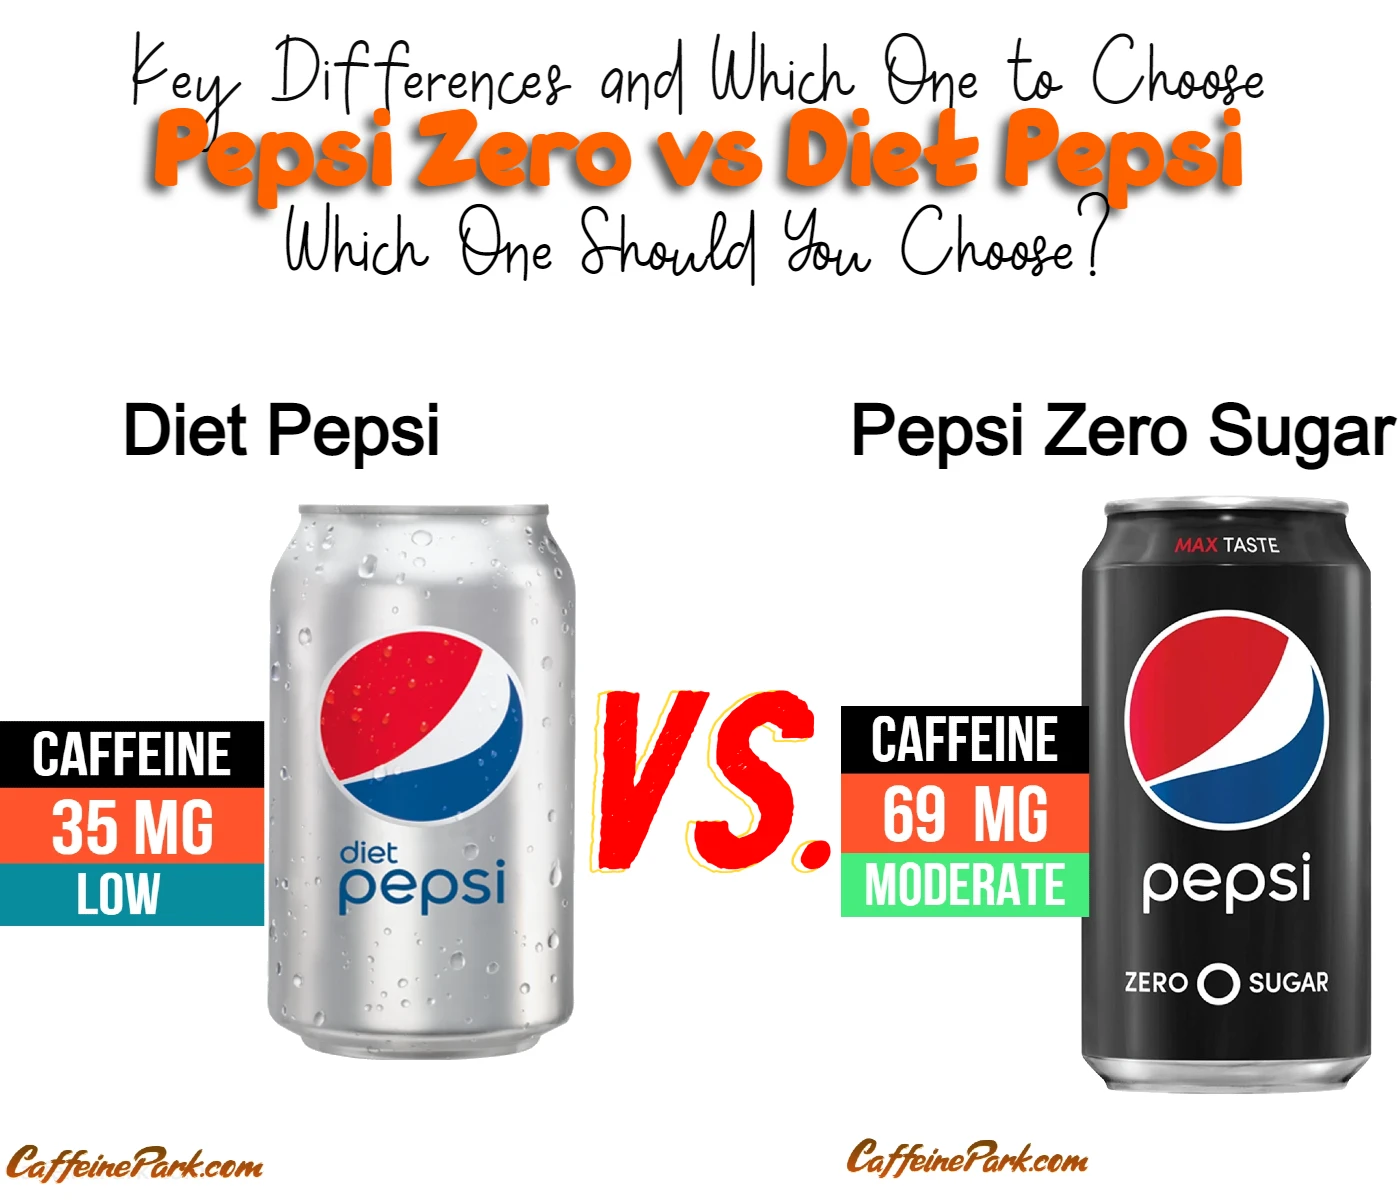 what is the difference between pepsi zero and diet pepsi?